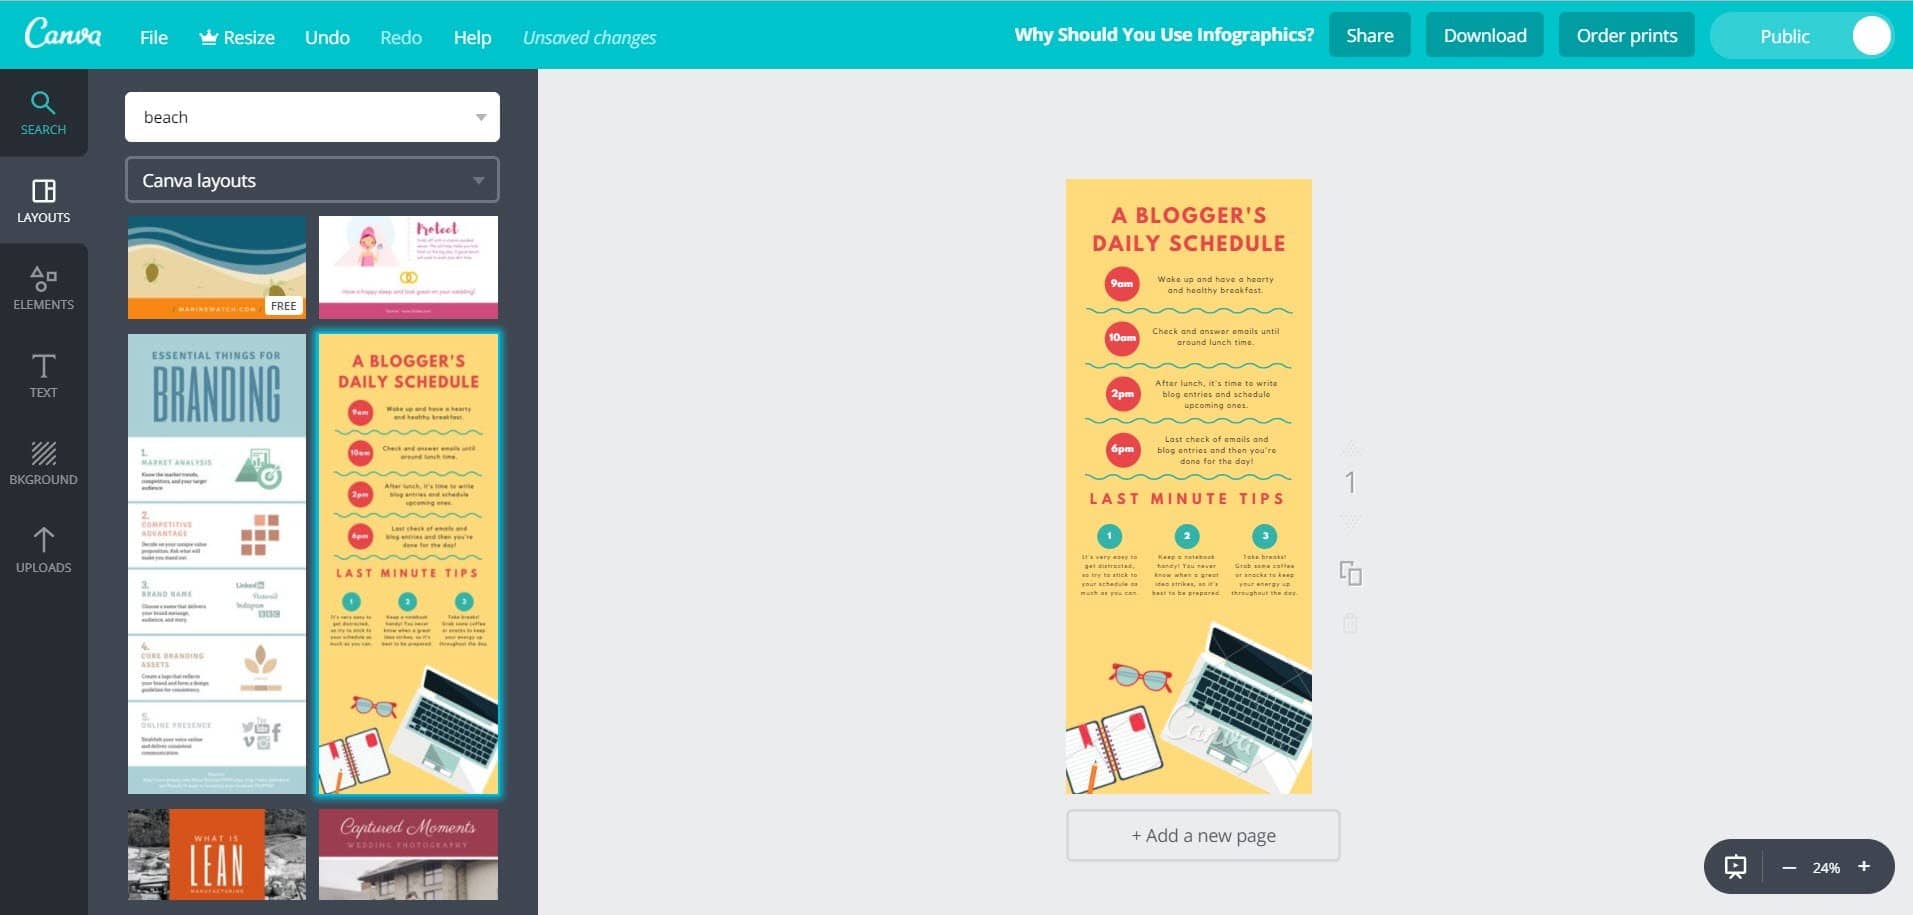 how to make infographics with Canva